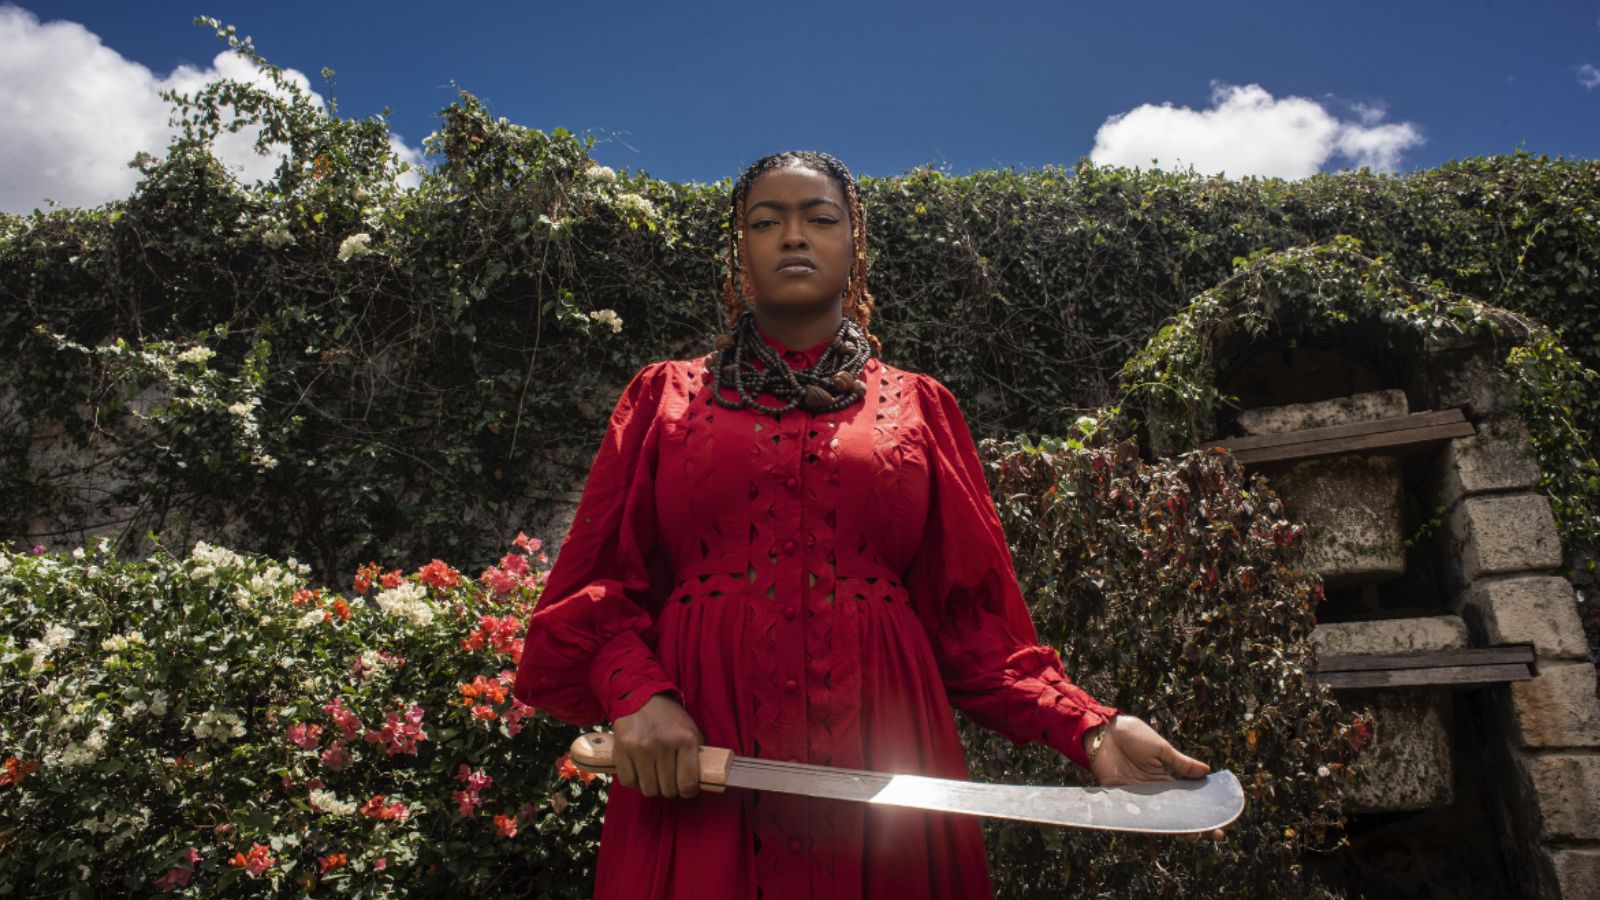 A woman stands proudly wearing a red dress and holding a large curved knife outside in front of a lush garden against a blue sky